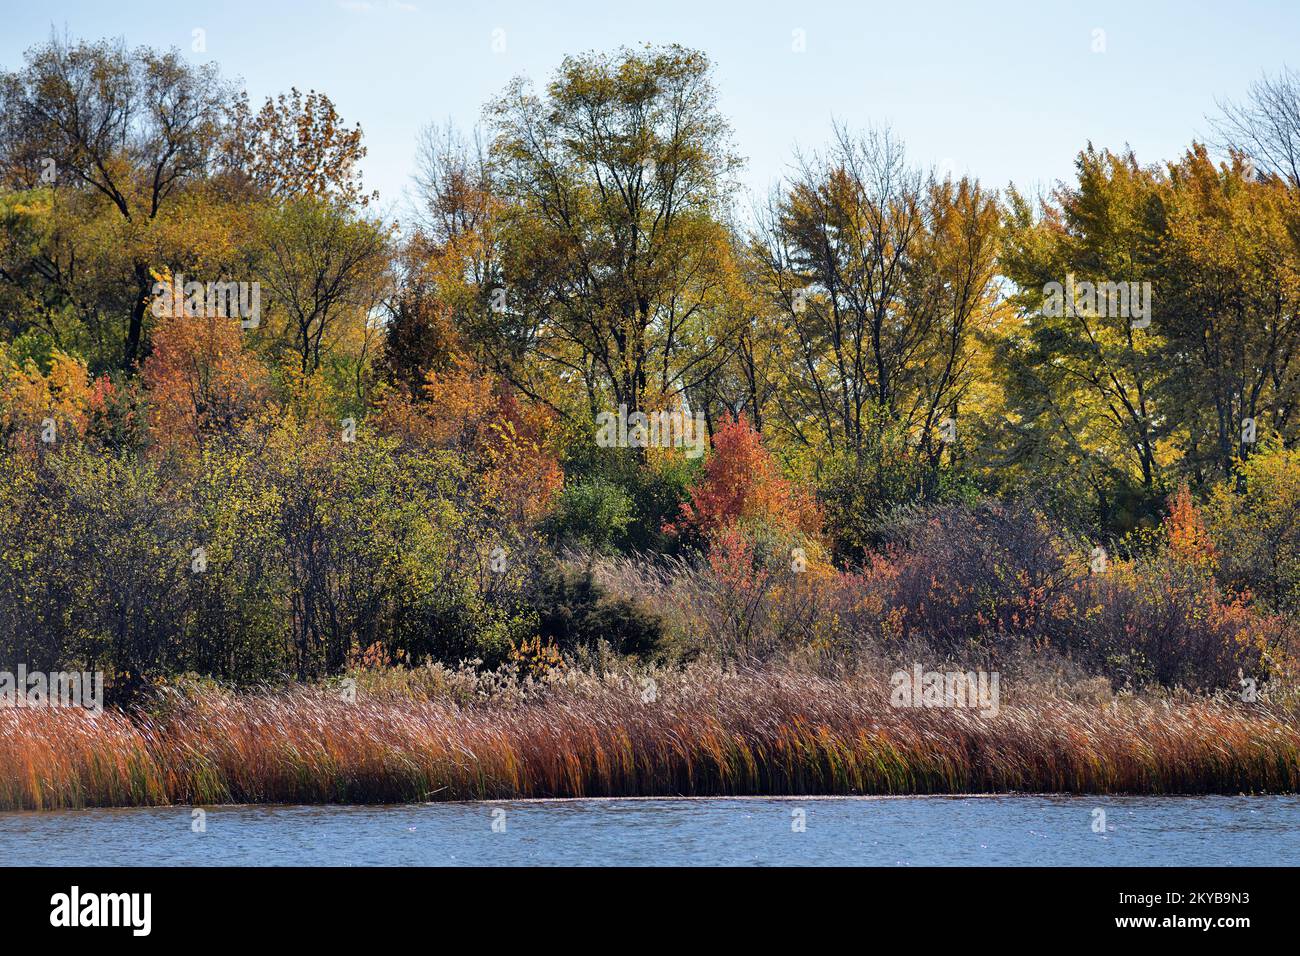 Bloomingdale, Illinois, USA. The beauty and color of the autumn season in evidence around a lake at a protected forest preserve area. Stock Photo